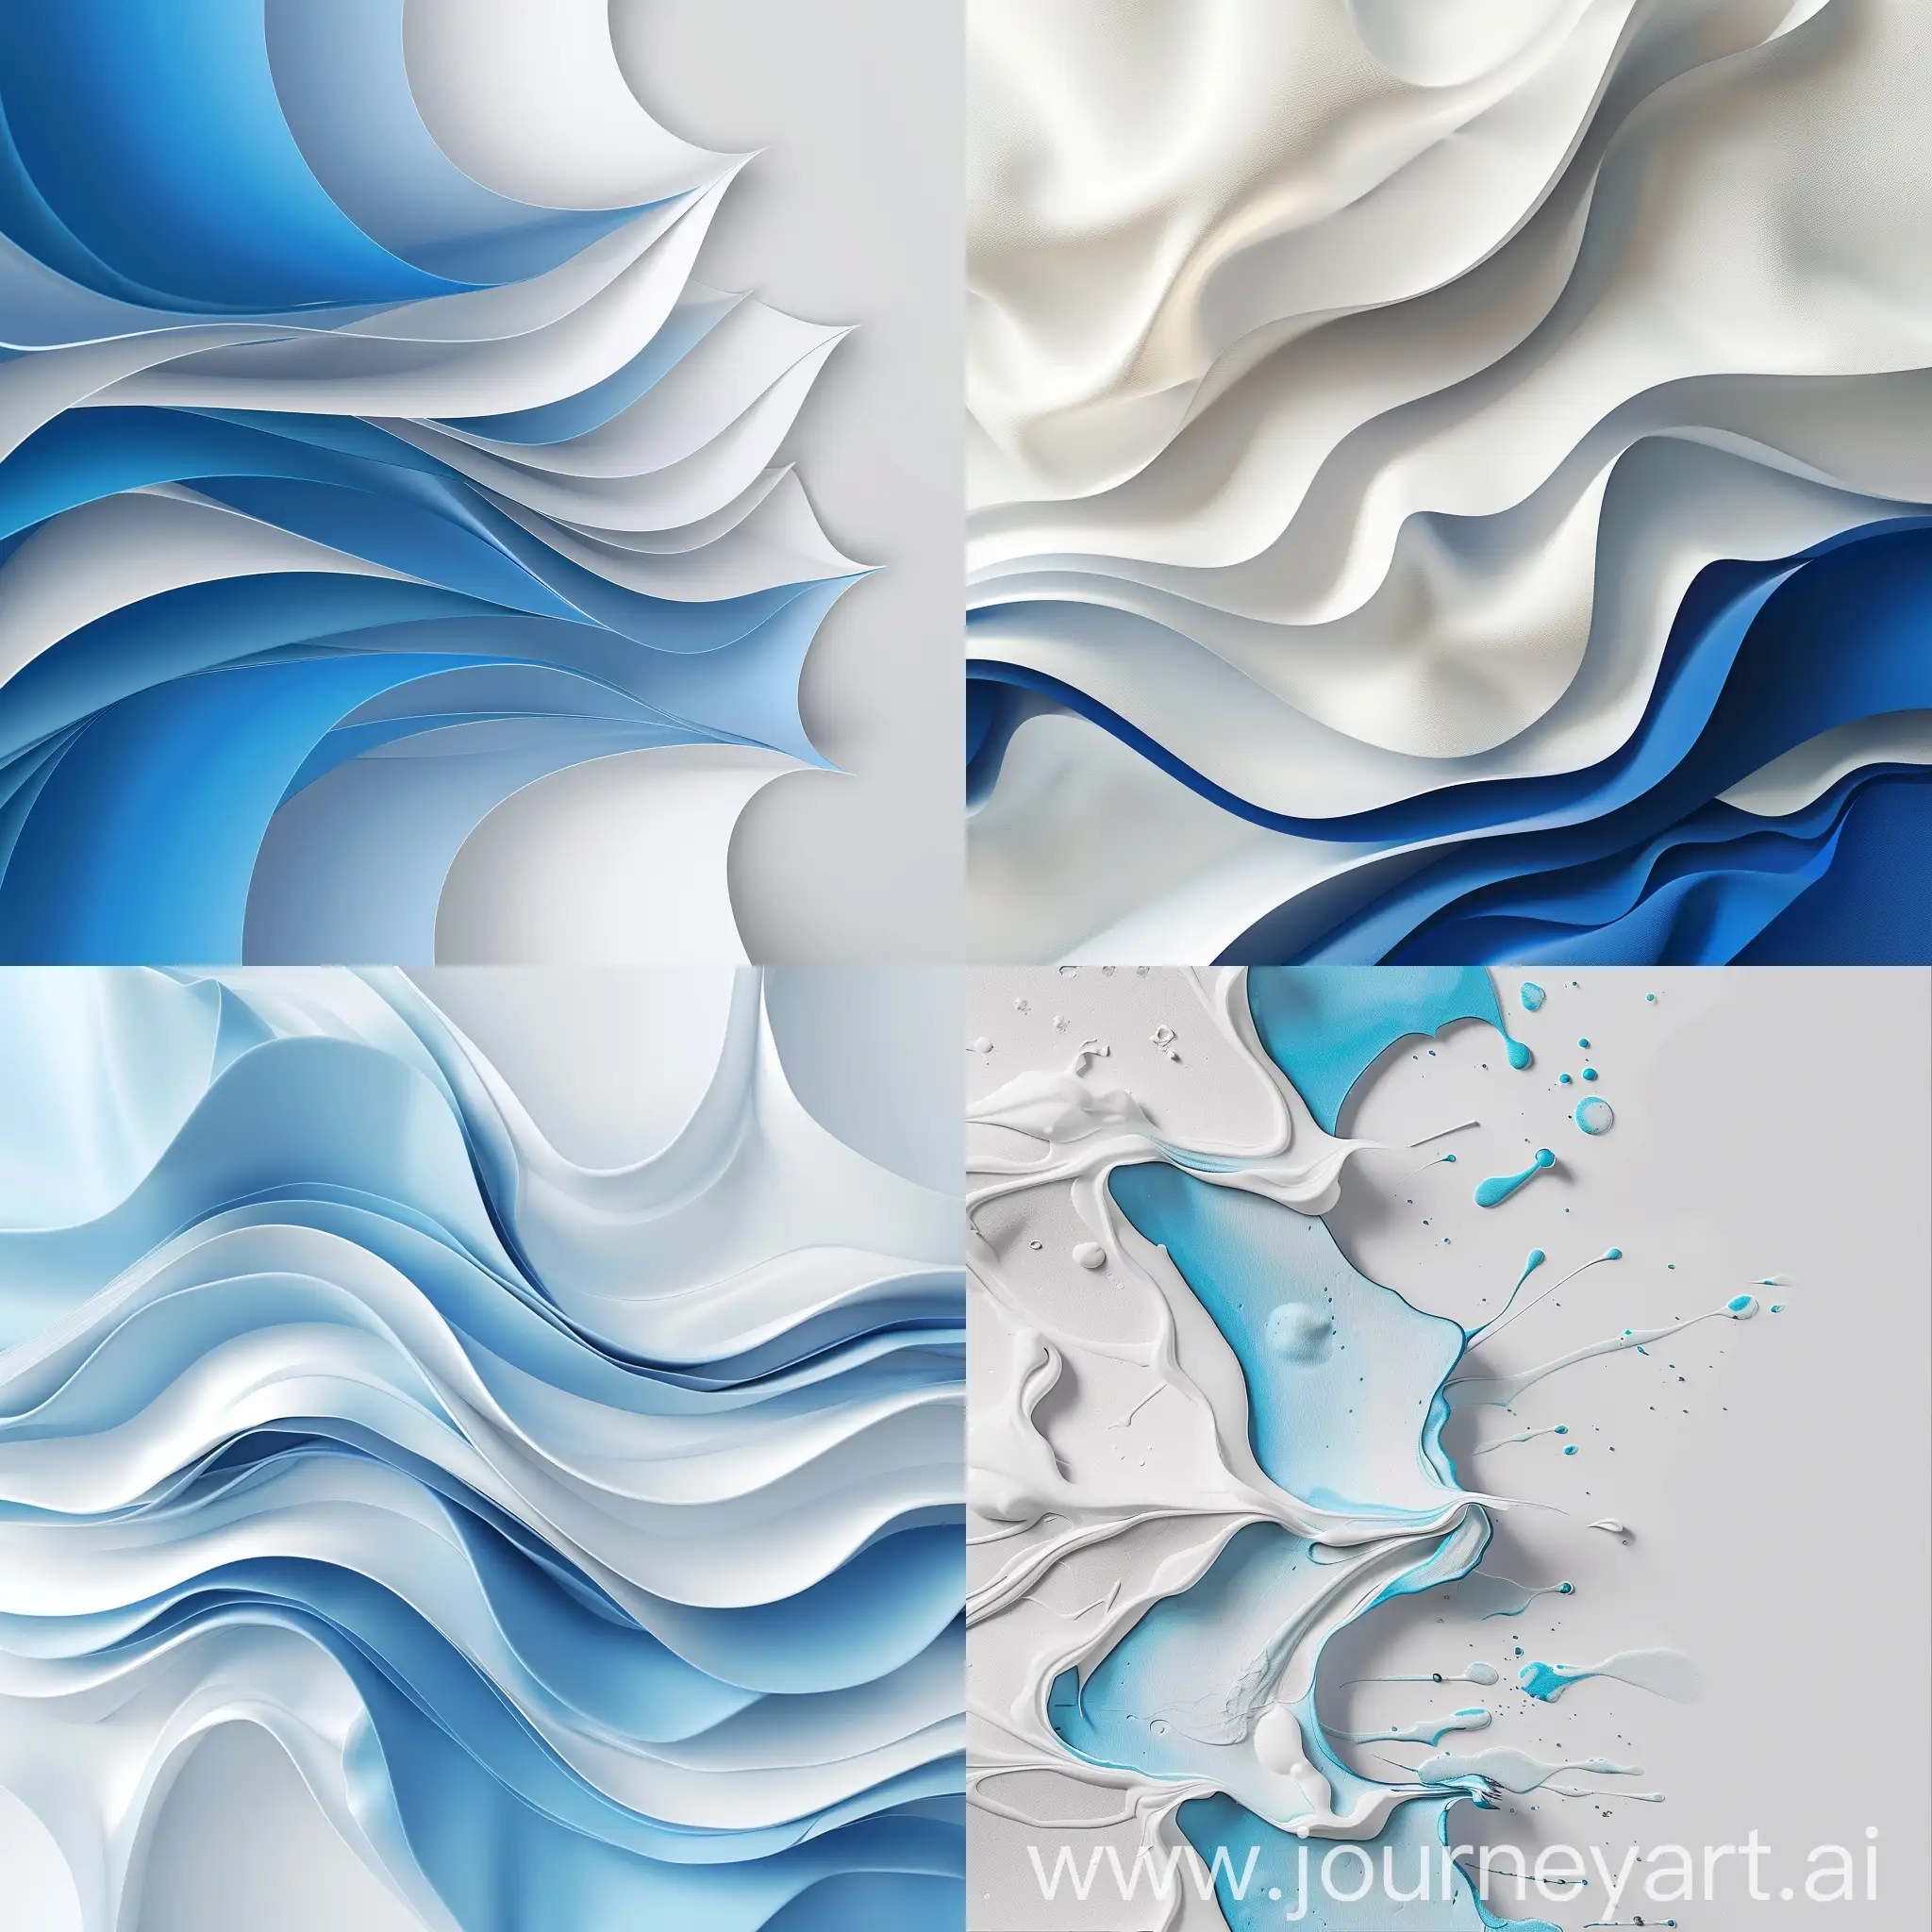 Elegant-White-and-Blue-Abstract-Art-with-Volume